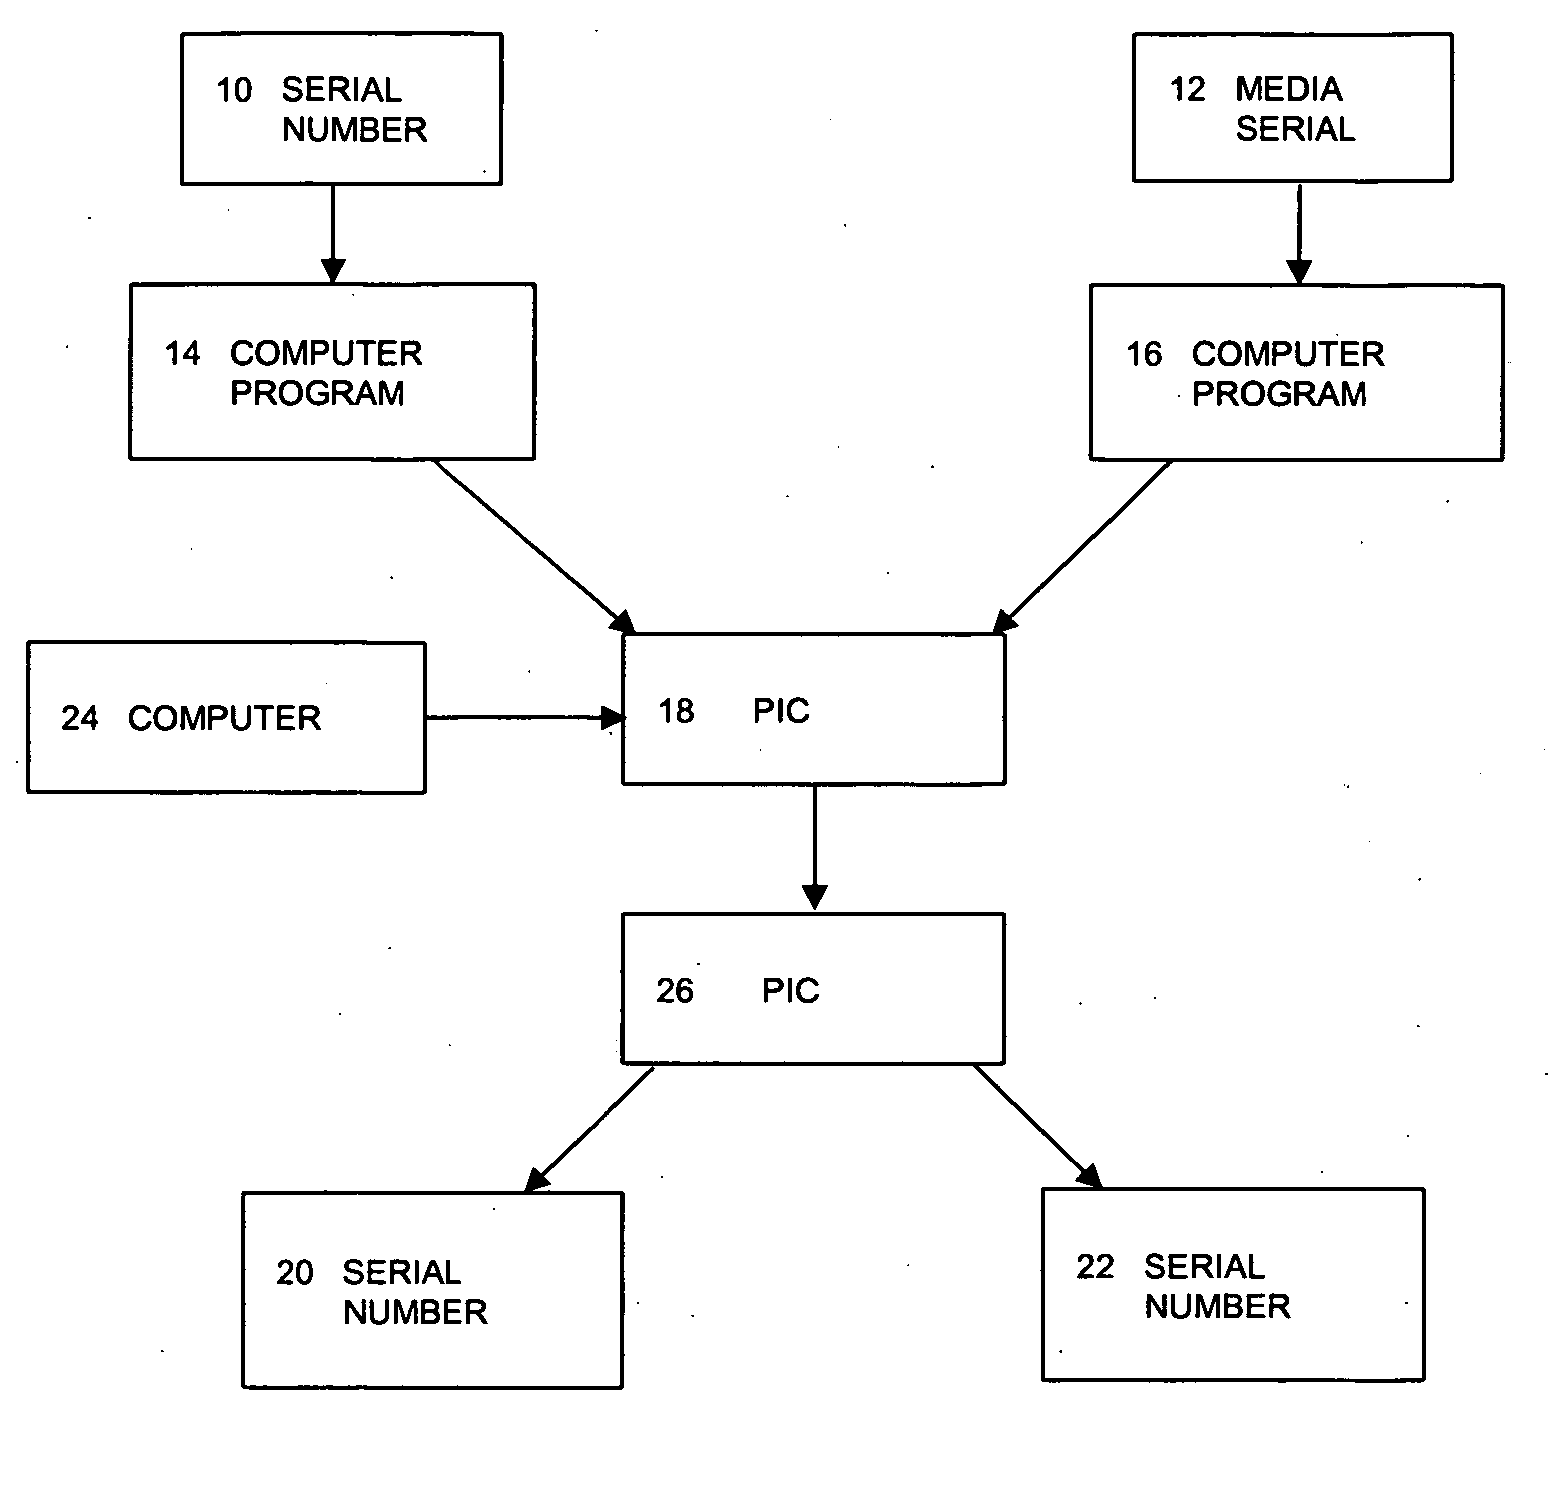 Method of manufacturing application software